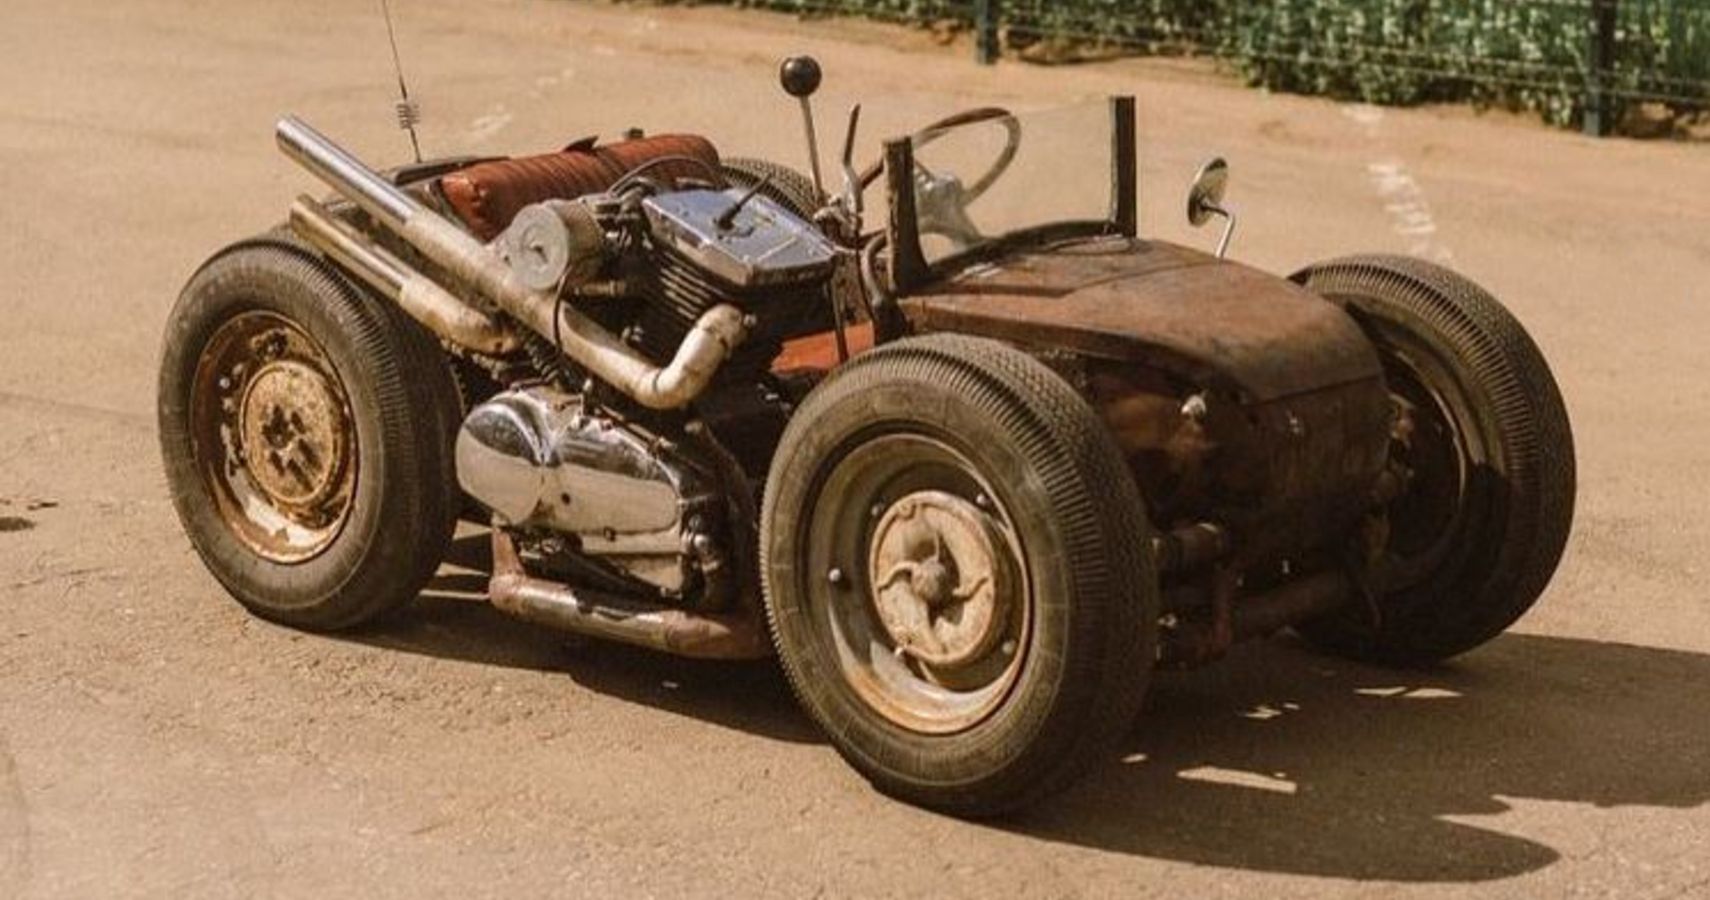 The Ural Sidecar Hot Rod called Siderod parked.